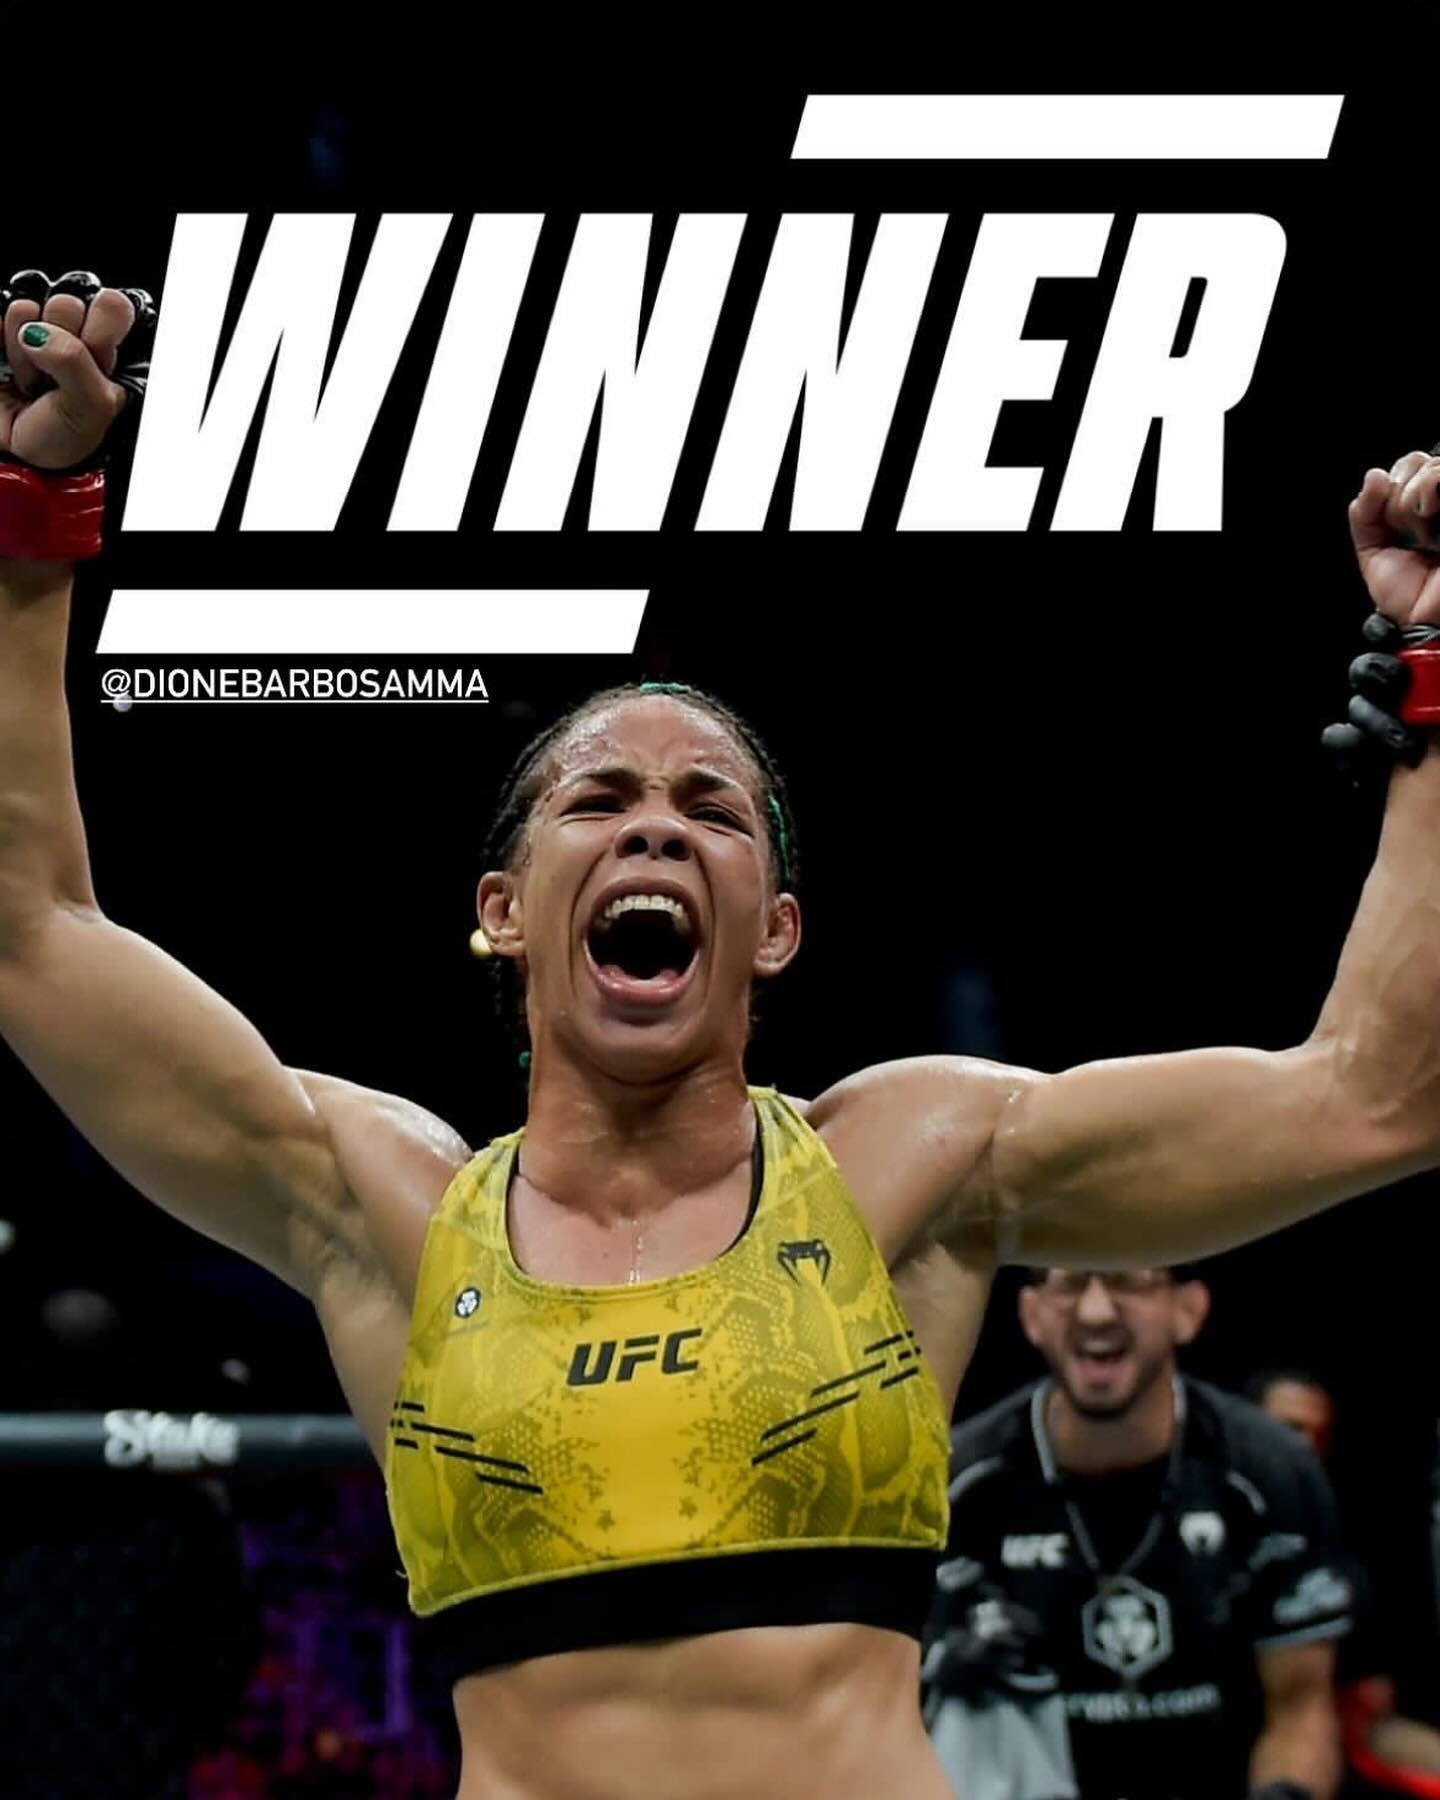 Congrats @dionebarbosamma we&rsquo;re all very proud of you on your debut performance at @ufc @ufc_brasil